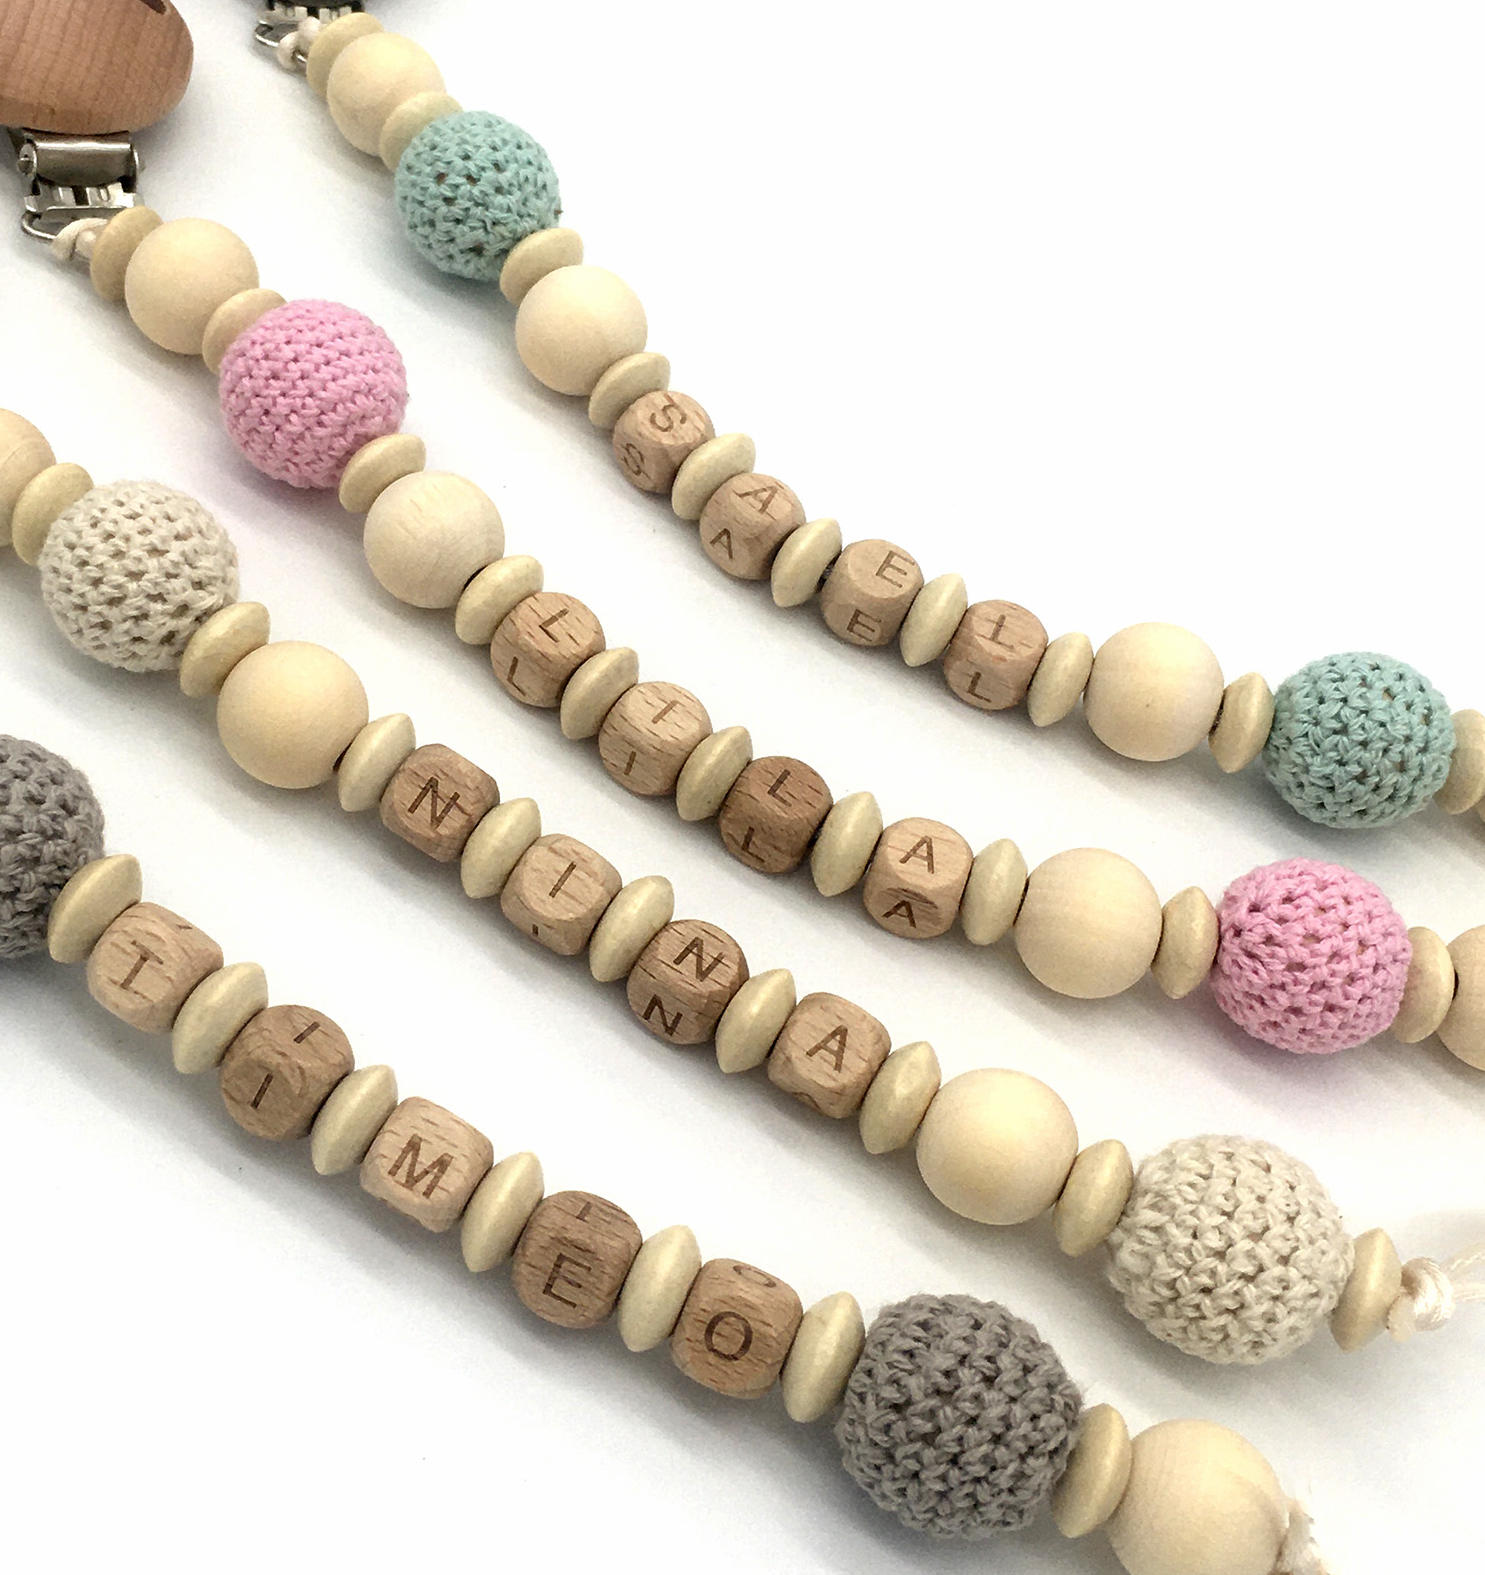 Pacifier Clip Personalized Engraved Pacifier Clip Baby Personalized Pacifier Clip Beaded Personalized Pacifier Clip Engraved Pacifier Clip